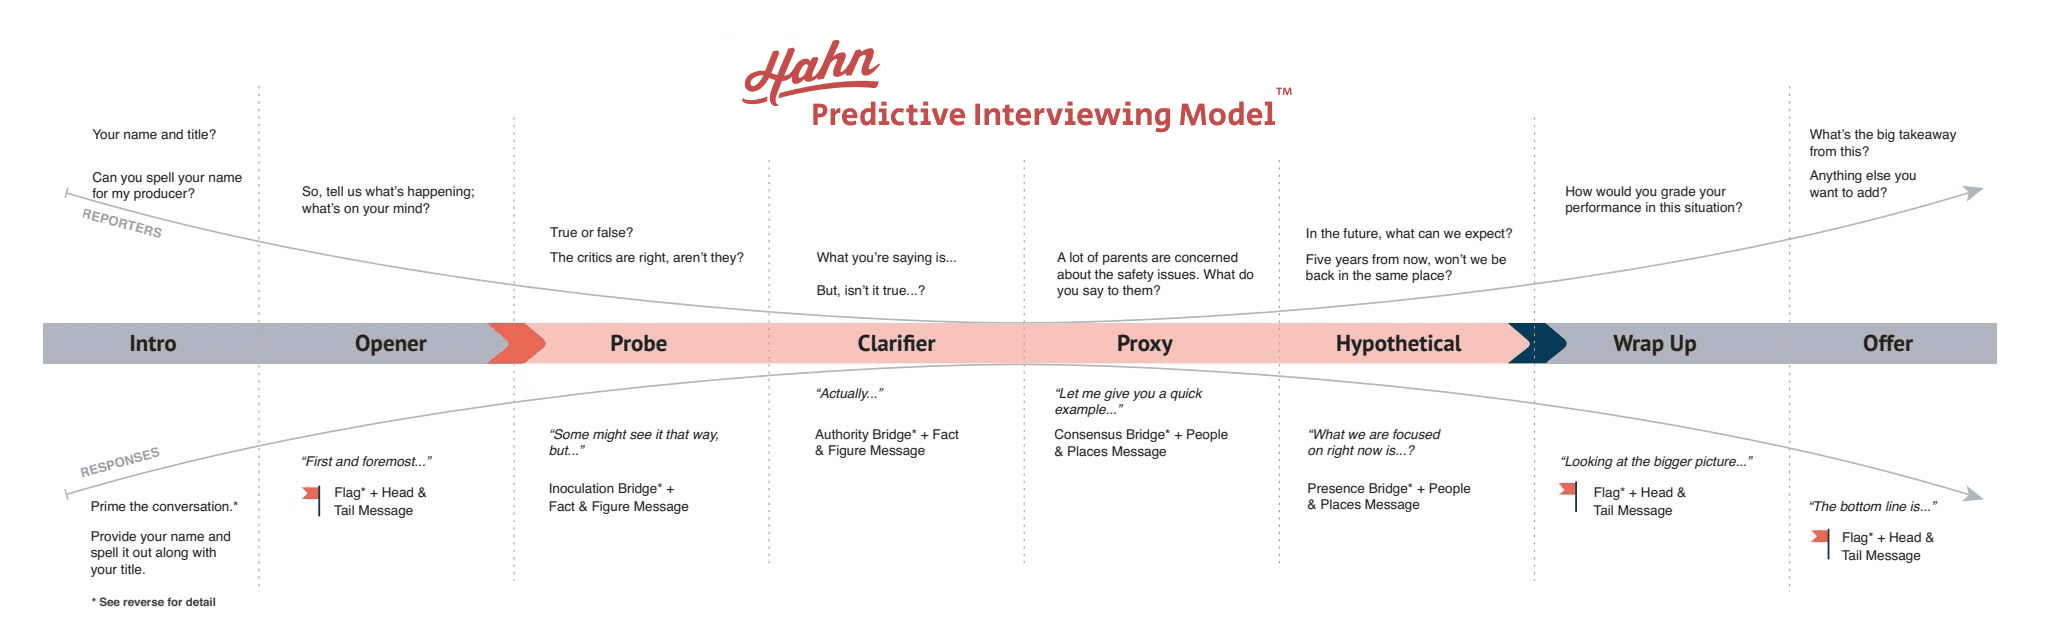 preditive-interviewing-model